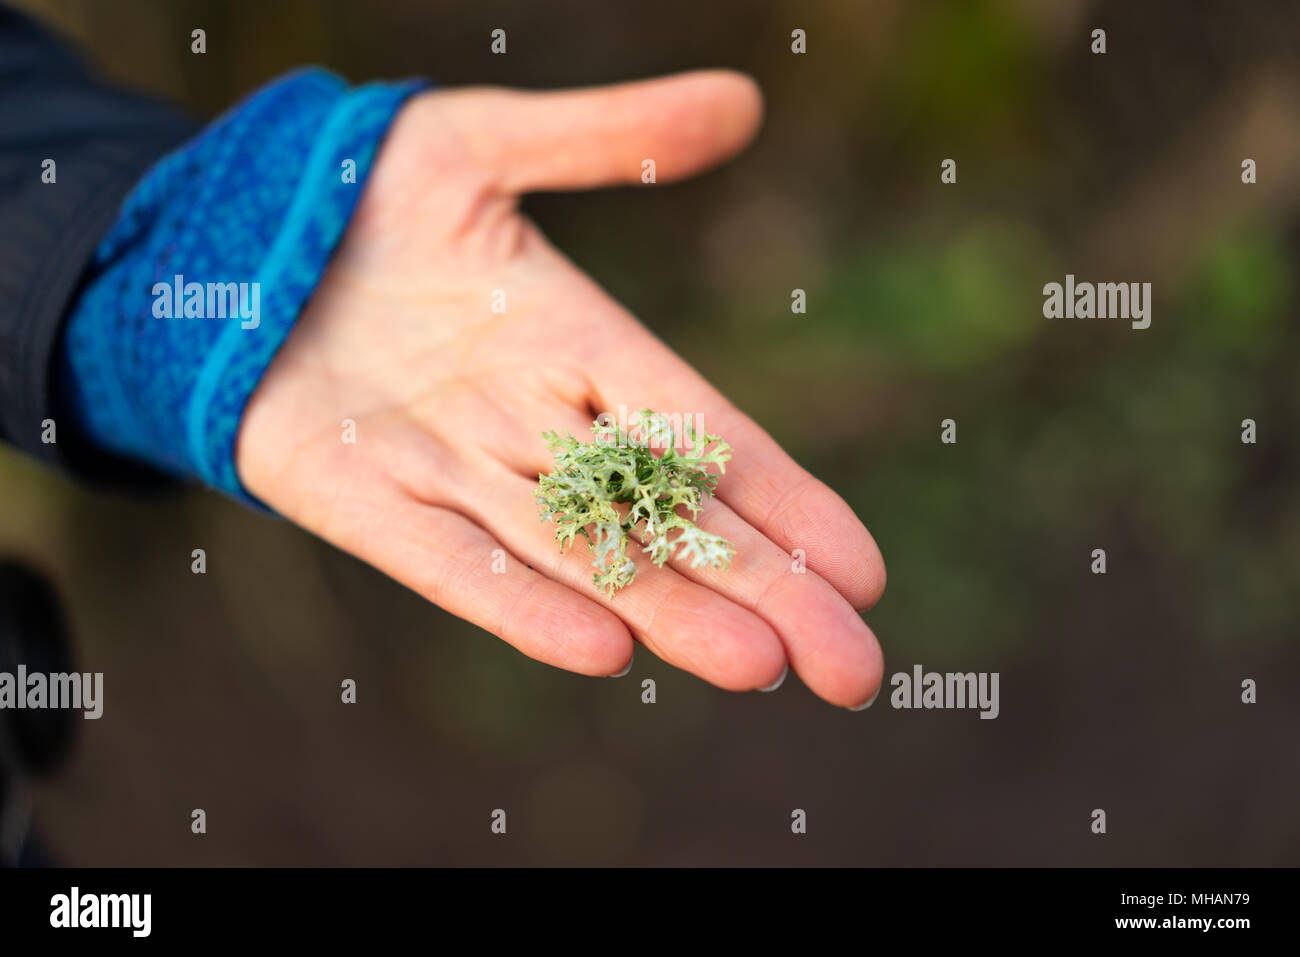 Lichen being held in the hand of a young woman Stock Photo